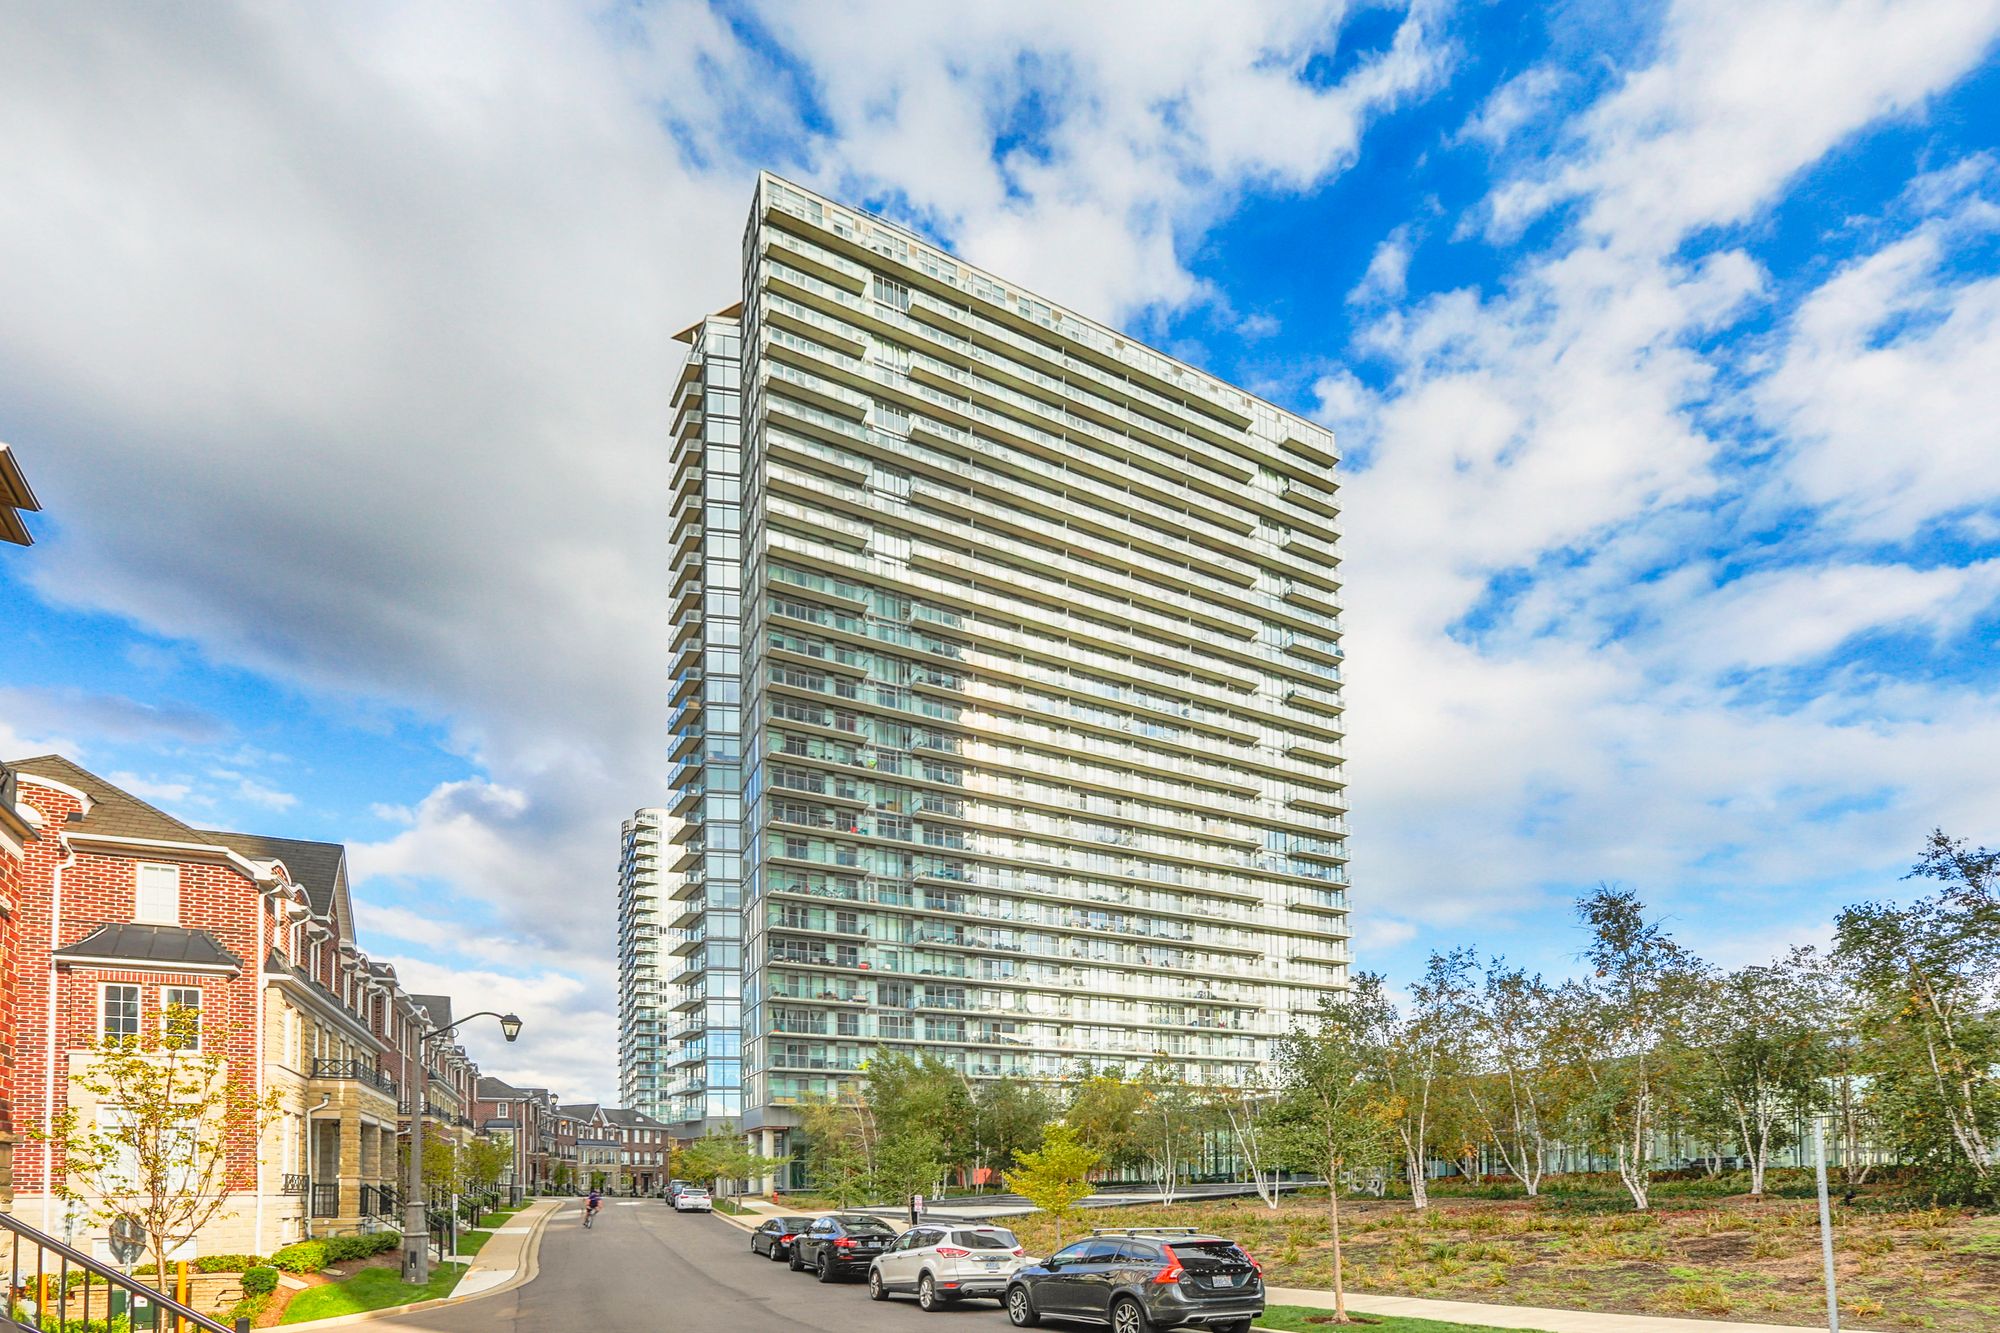 103 The Queensway. This condo at NXT Condos is located in  West End, Toronto - image #1 of 5 by Strata.ca